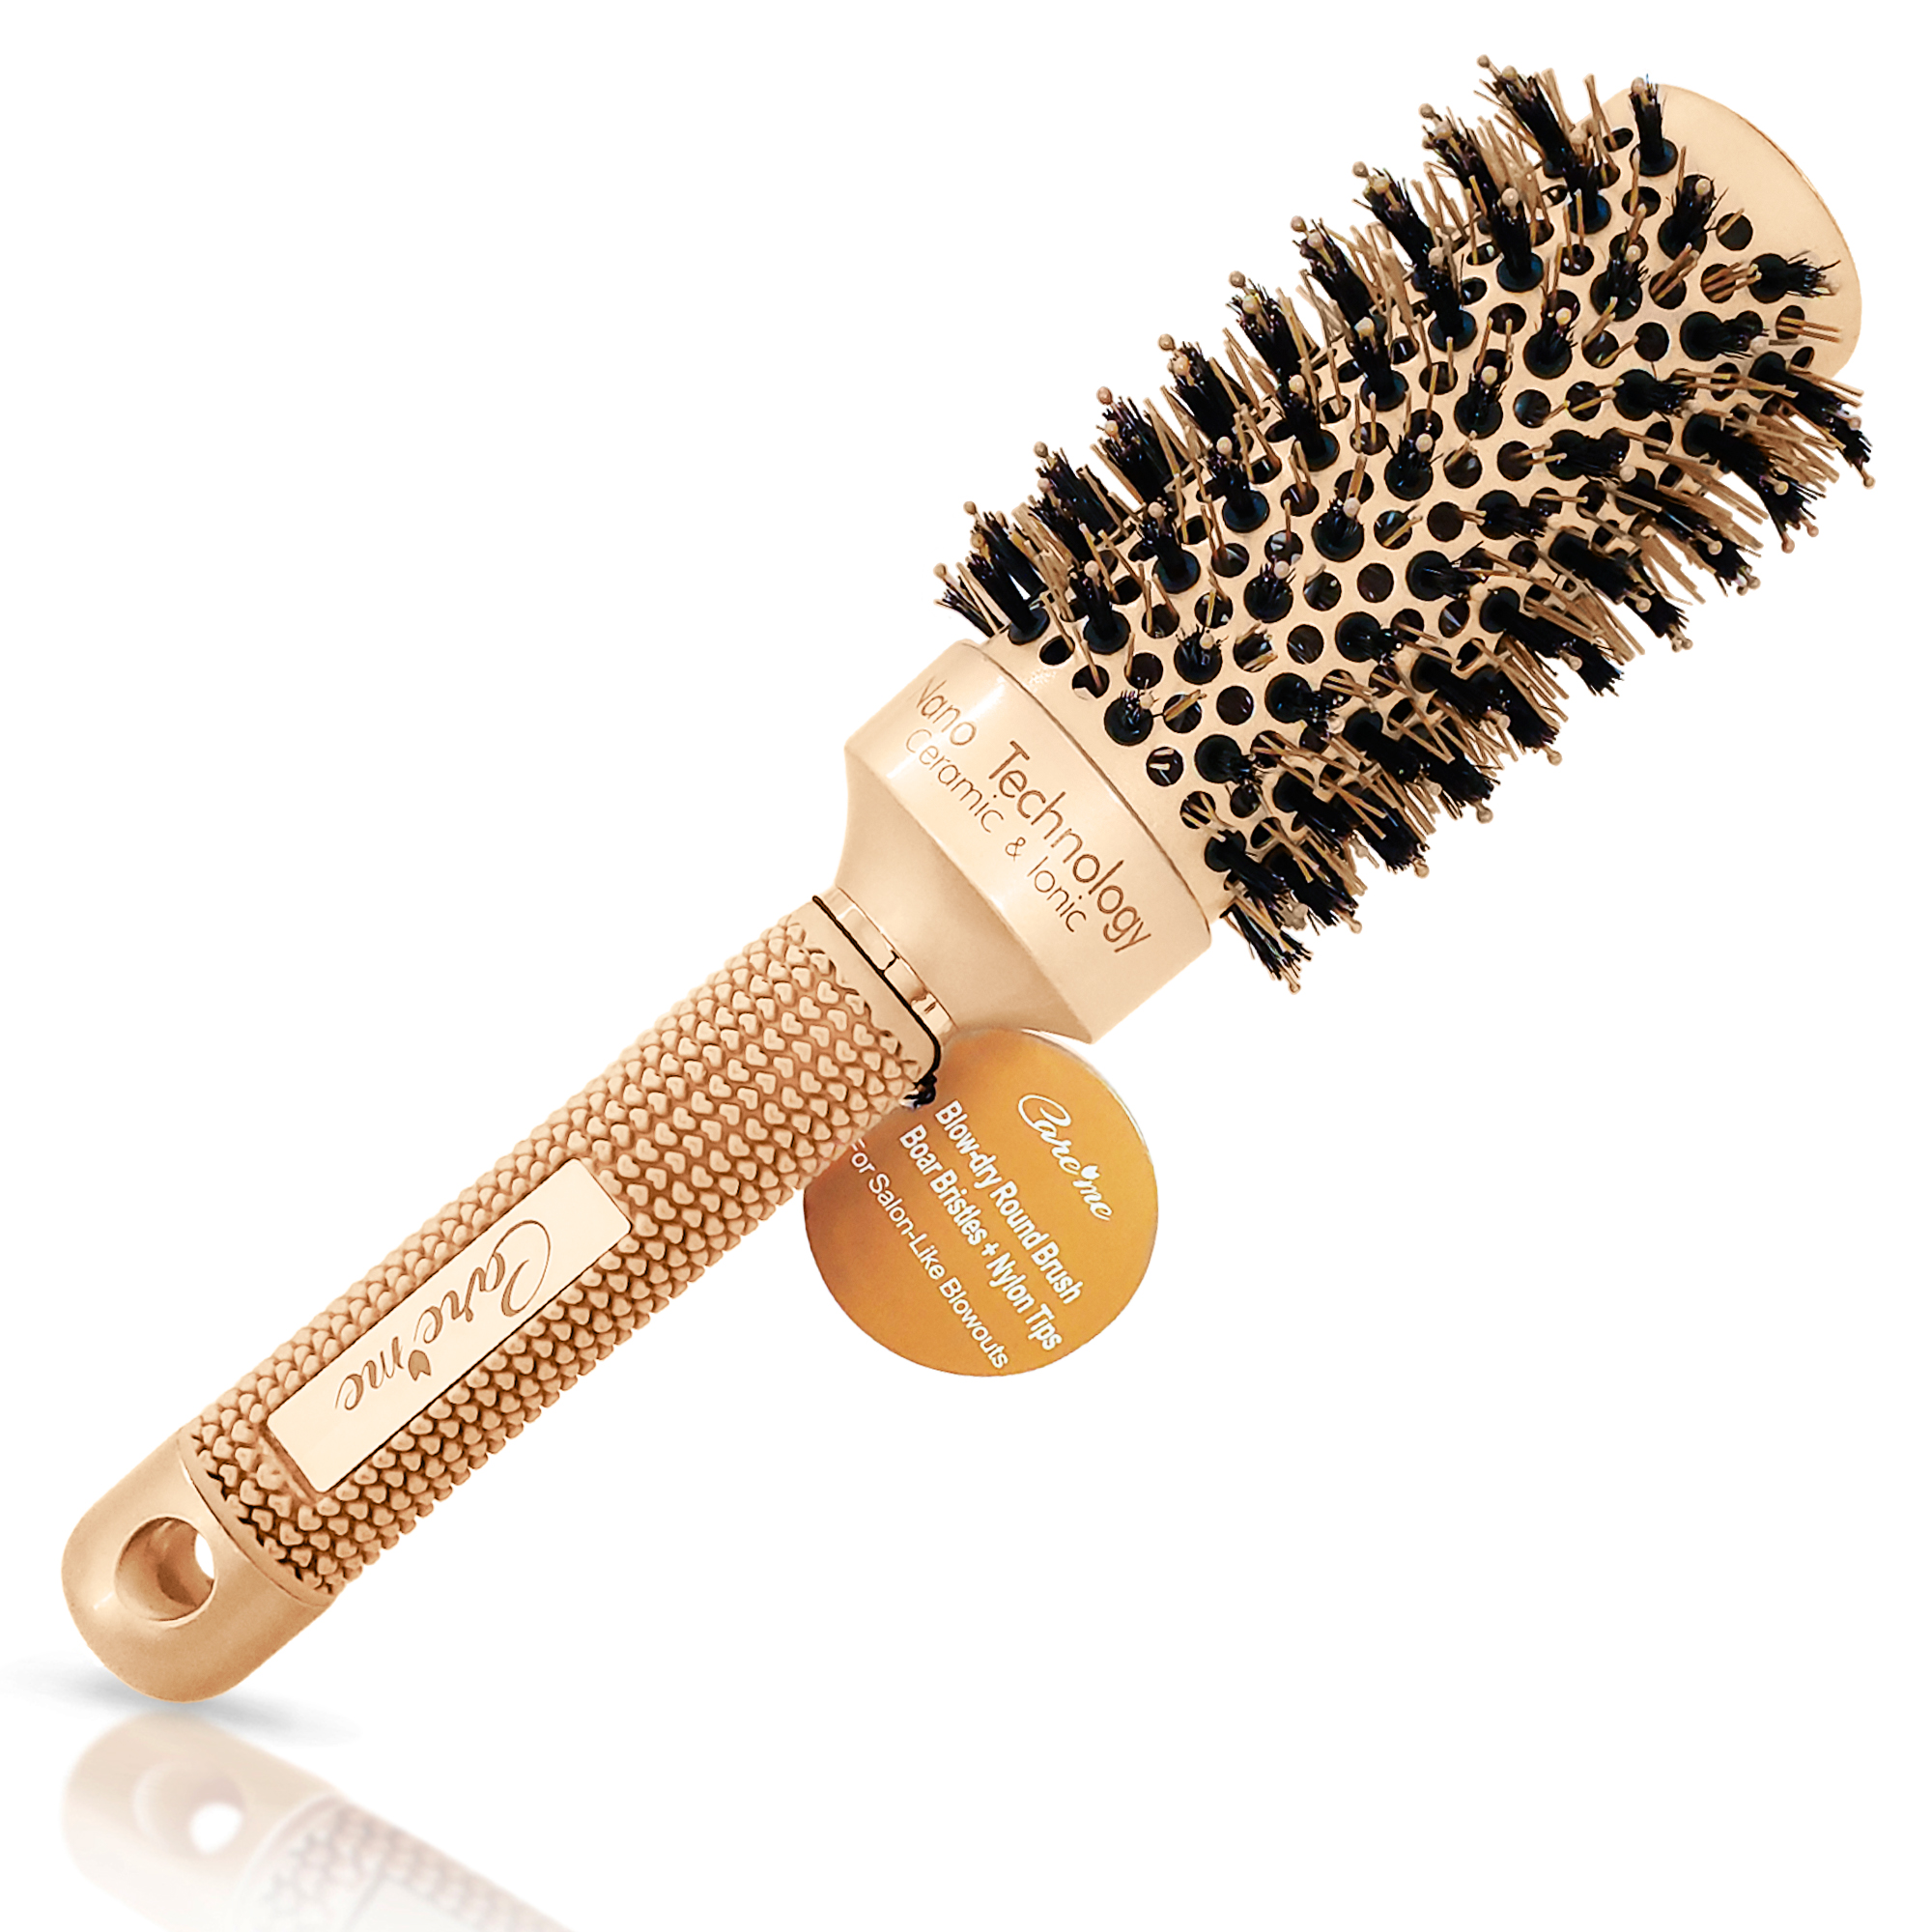 Professional Styling Blow Dry Round Hair Brush For Blowout With Natural Boars 1 7 Inch